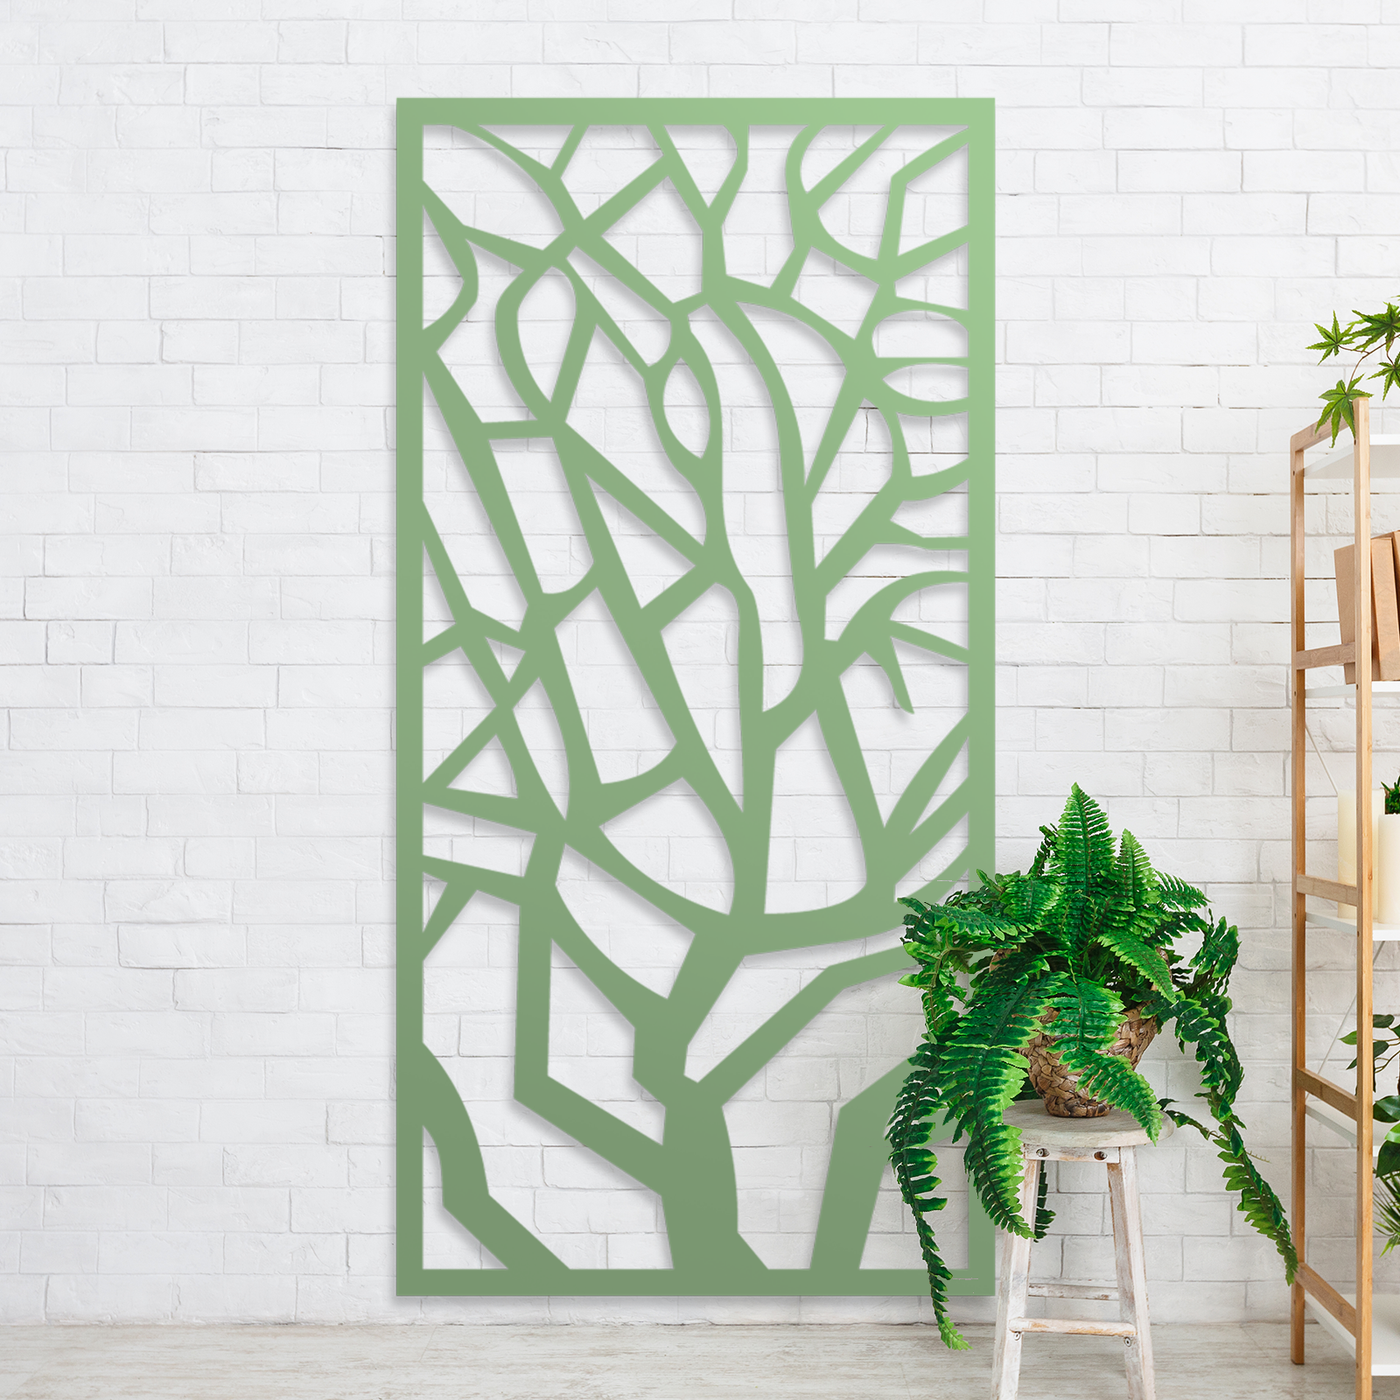 Cold Branch Metal Screen: A Garden Screen that is Both Functional and Stylish